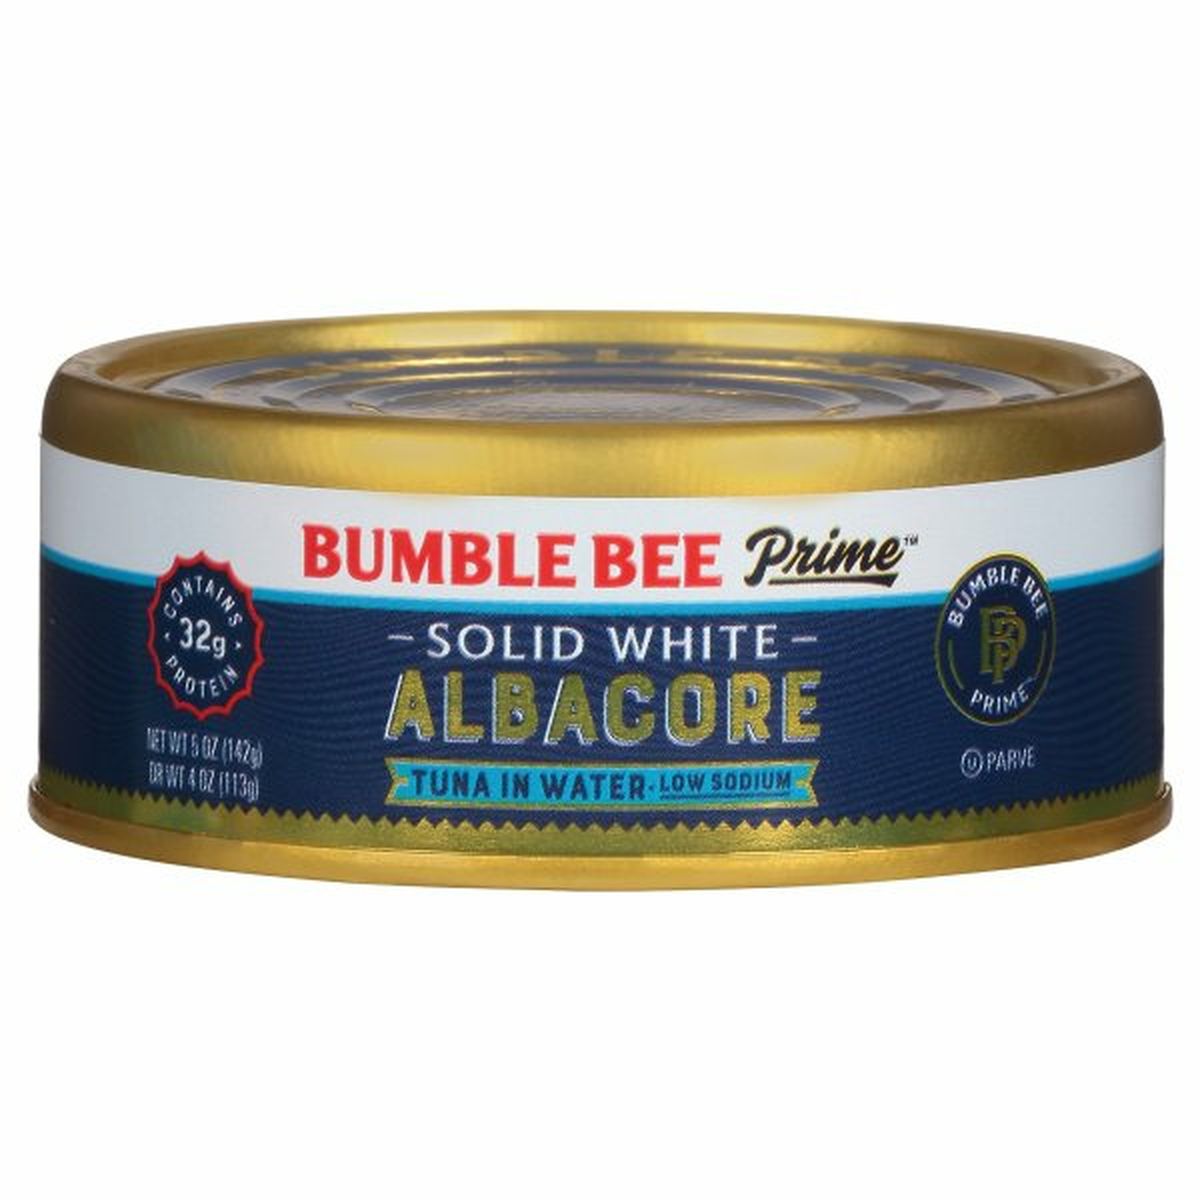 Calories in Bumble Bee Prime Tuna in Water, Solid White, Albacore